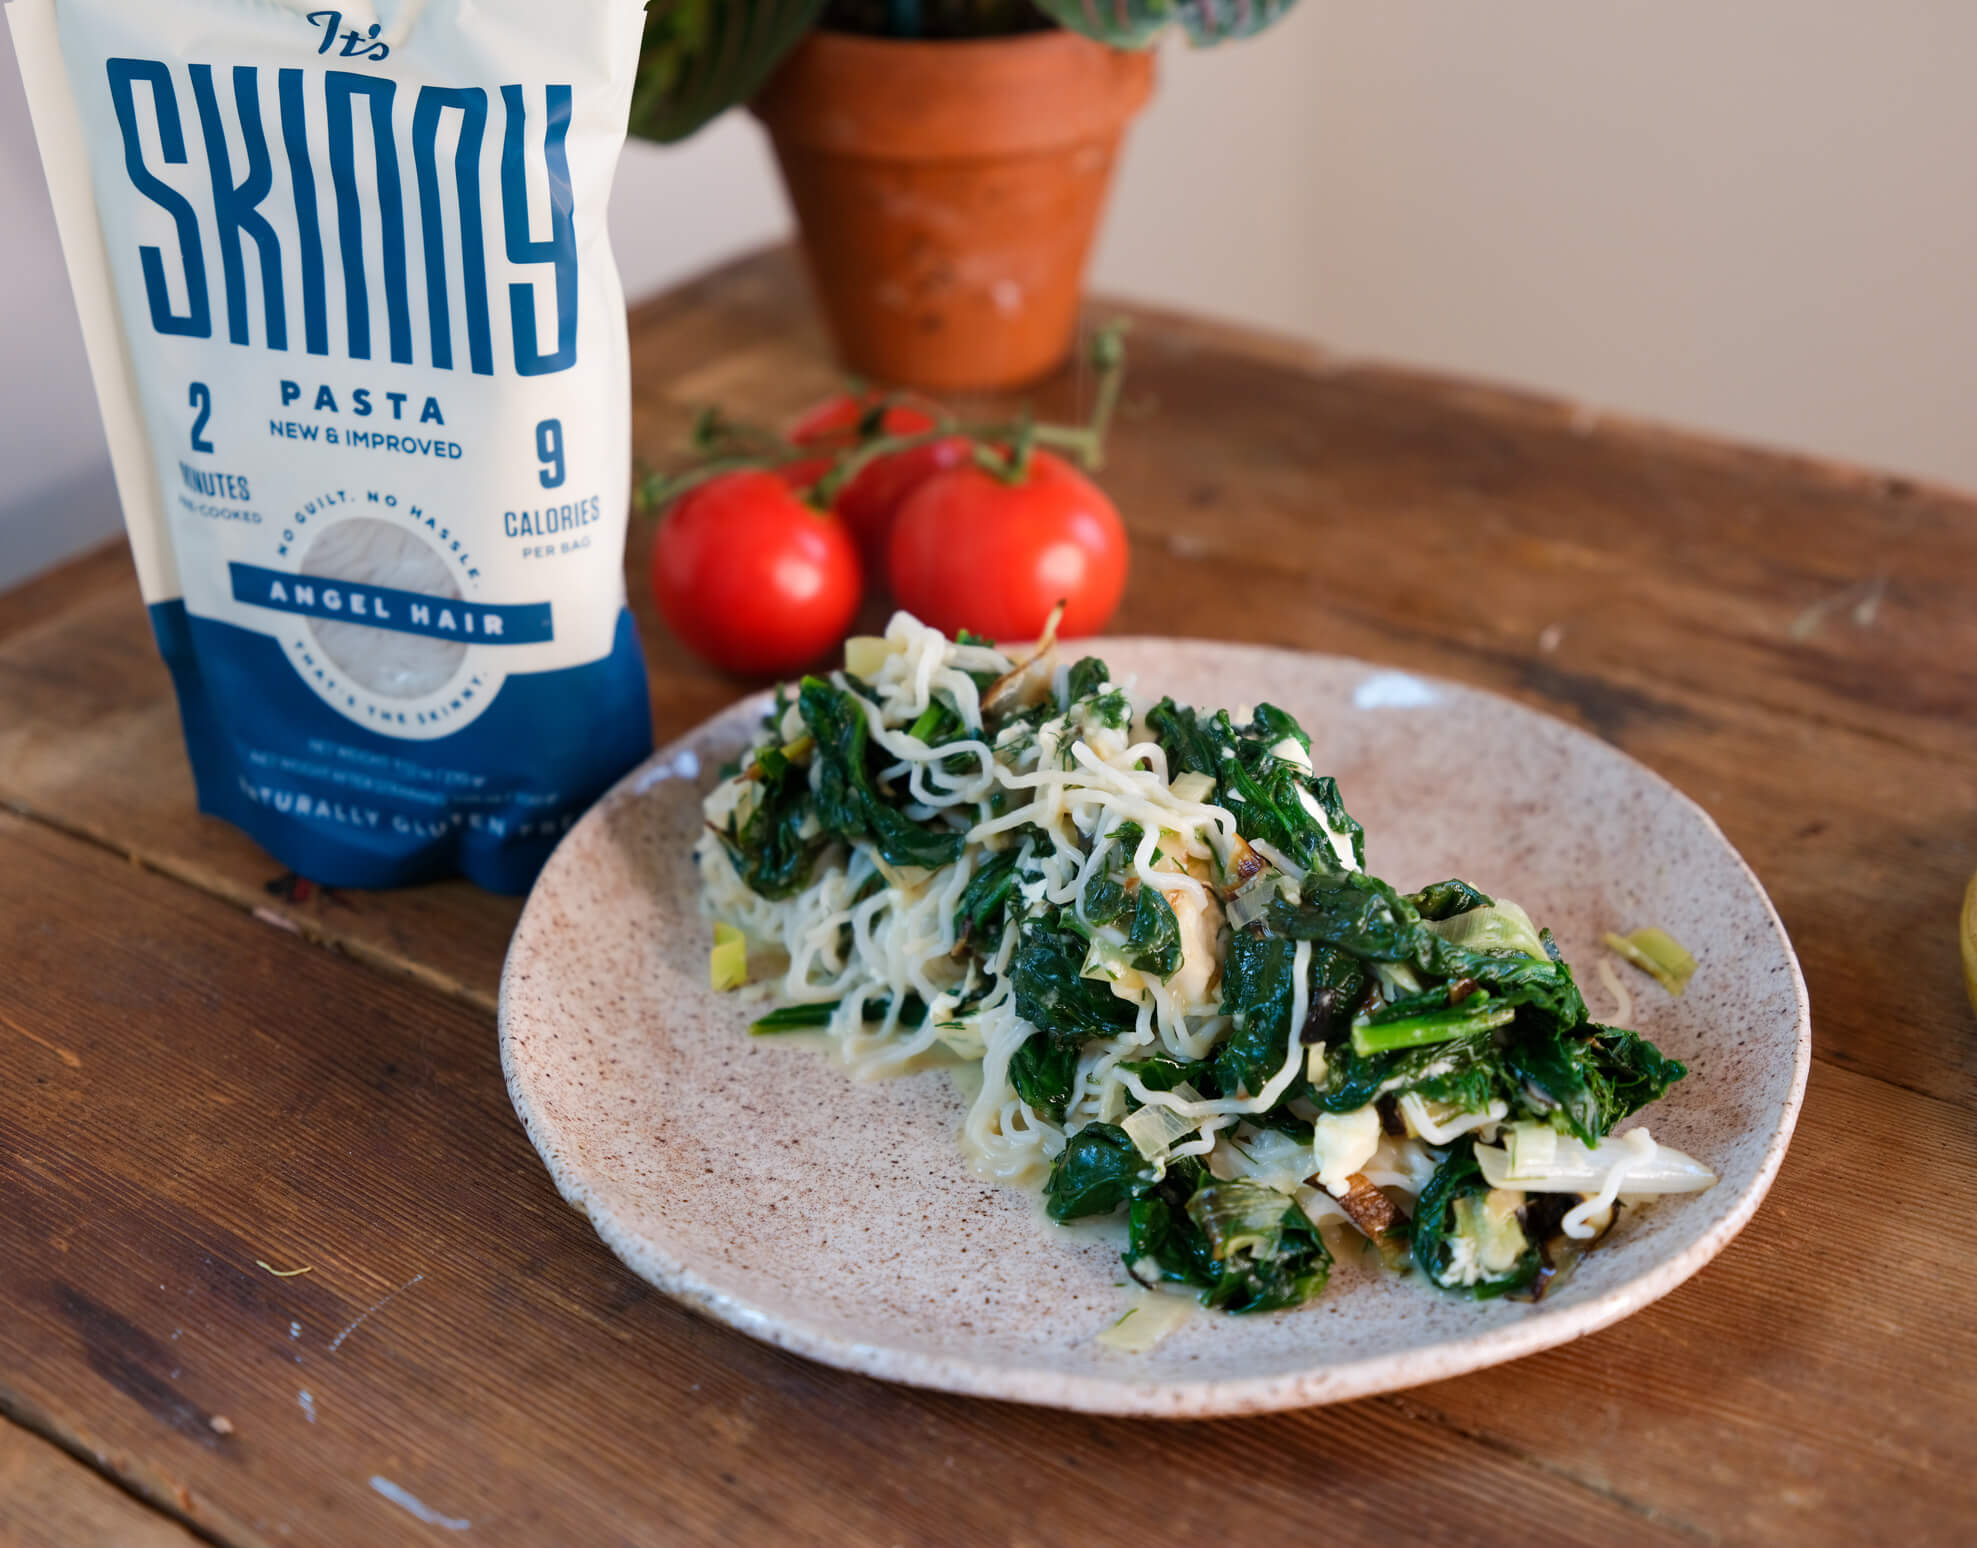 A white plate full of spinach and feta pasta sits on a wooden tabletop, next to a bag of It's Skinny angel hair pasta.